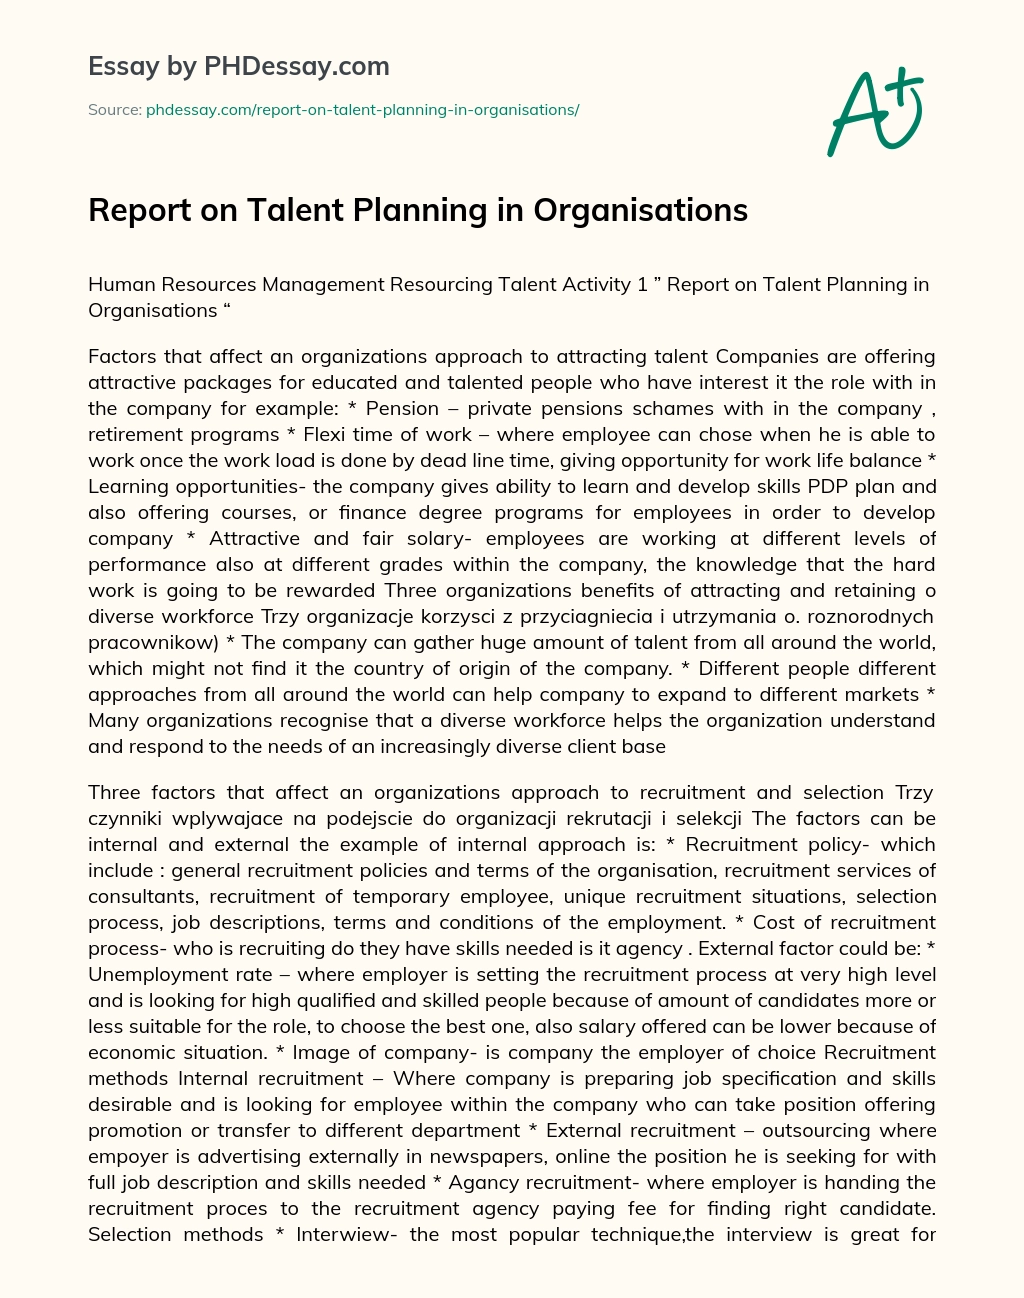 Report on Talent Planning in Organisations essay